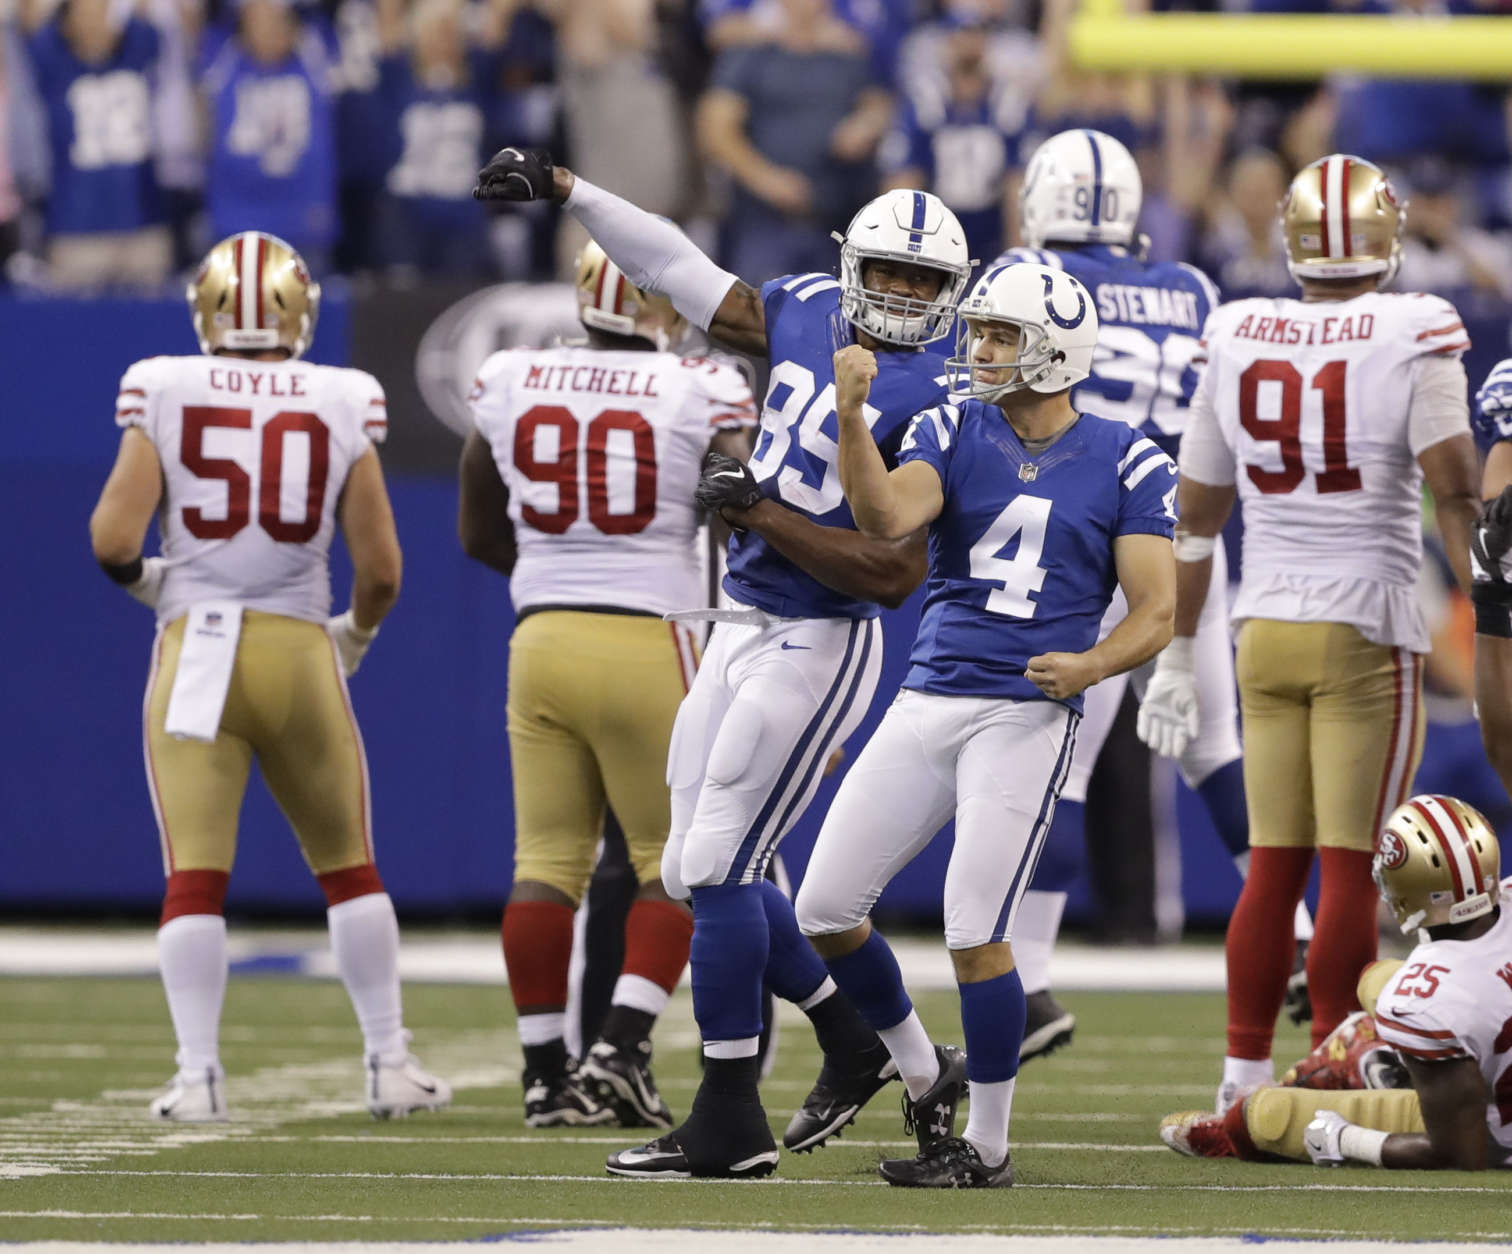 Indianapolis Colts' Adam Vinatieri (4) celebrates after kicking the game winning 51-yard field goal out of the hold of Rigoberto Sanchez (2) during overtime of an NFL football game against the San Francisco 49ers, Sunday, Oct. 8, 2017, in Indianapolis. Indianapolis won 26-23. (AP Photo/Darron Cummings)